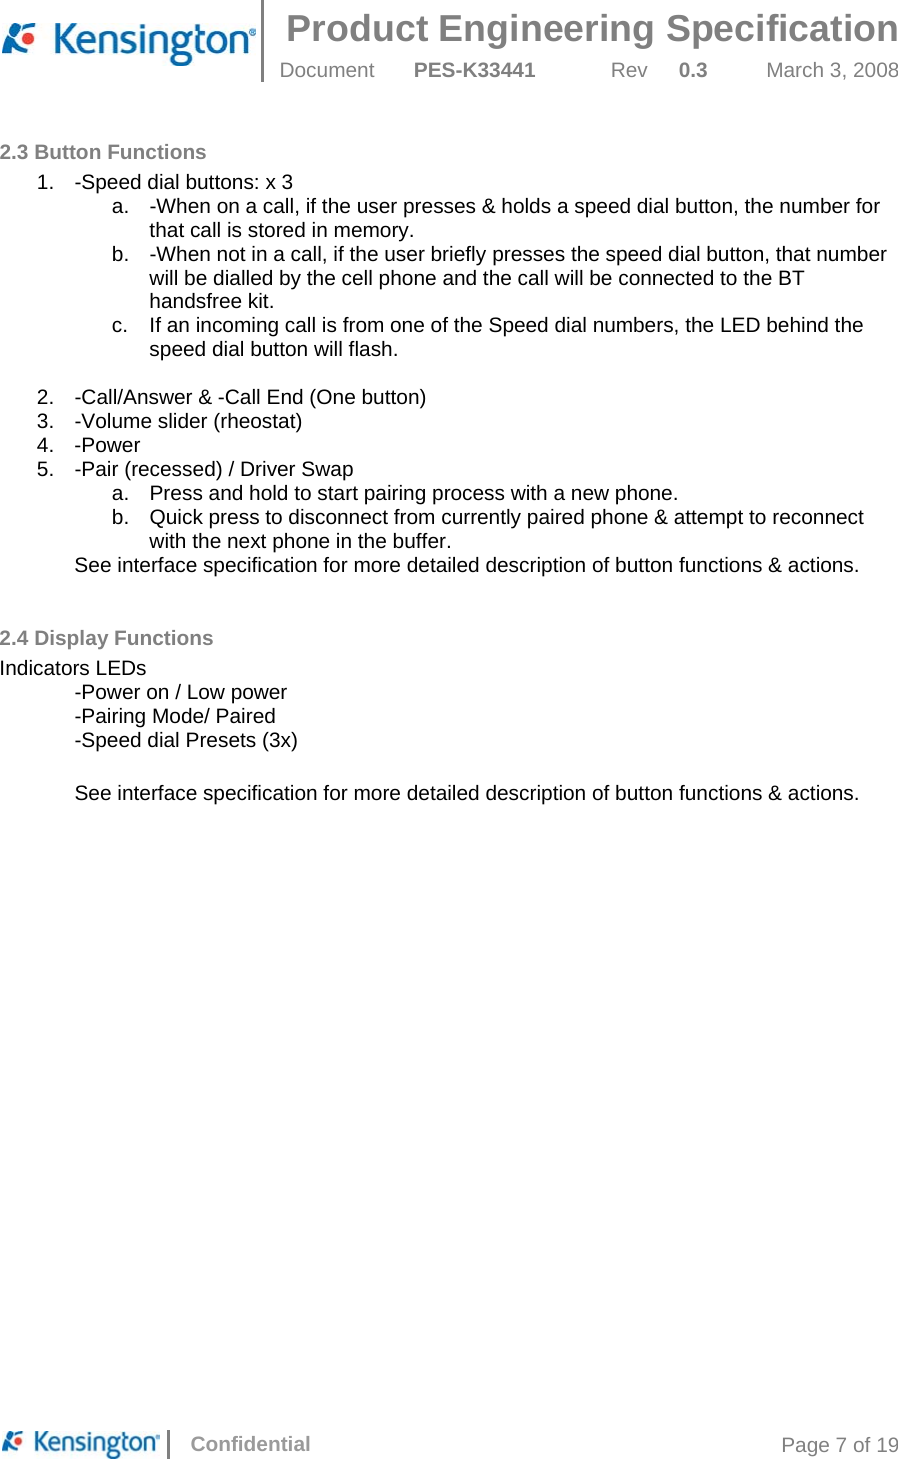  Product Engineering Specification Document  PES-K33441  Rev  0.3  March 3, 2008      Confidential  Page 7 of 19 2.3 Button Functions 1.  -Speed dial buttons: x 3 a.  -When on a call, if the user presses &amp; holds a speed dial button, the number for that call is stored in memory. b.  -When not in a call, if the user briefly presses the speed dial button, that number will be dialled by the cell phone and the call will be connected to the BT handsfree kit. c.  If an incoming call is from one of the Speed dial numbers, the LED behind the speed dial button will flash.  2.  -Call/Answer &amp; -Call End (One button) 3. -Volume slider (rheostat) 4. -Power 5.  -Pair (recessed) / Driver Swap a.  Press and hold to start pairing process with a new phone. b.  Quick press to disconnect from currently paired phone &amp; attempt to reconnect with the next phone in the buffer. See interface specification for more detailed description of button functions &amp; actions.  2.4 Display Functions Indicators LEDs   -Power on / Low power   -Pairing Mode/ Paired   -Speed dial Presets (3x)  See interface specification for more detailed description of button functions &amp; actions.   